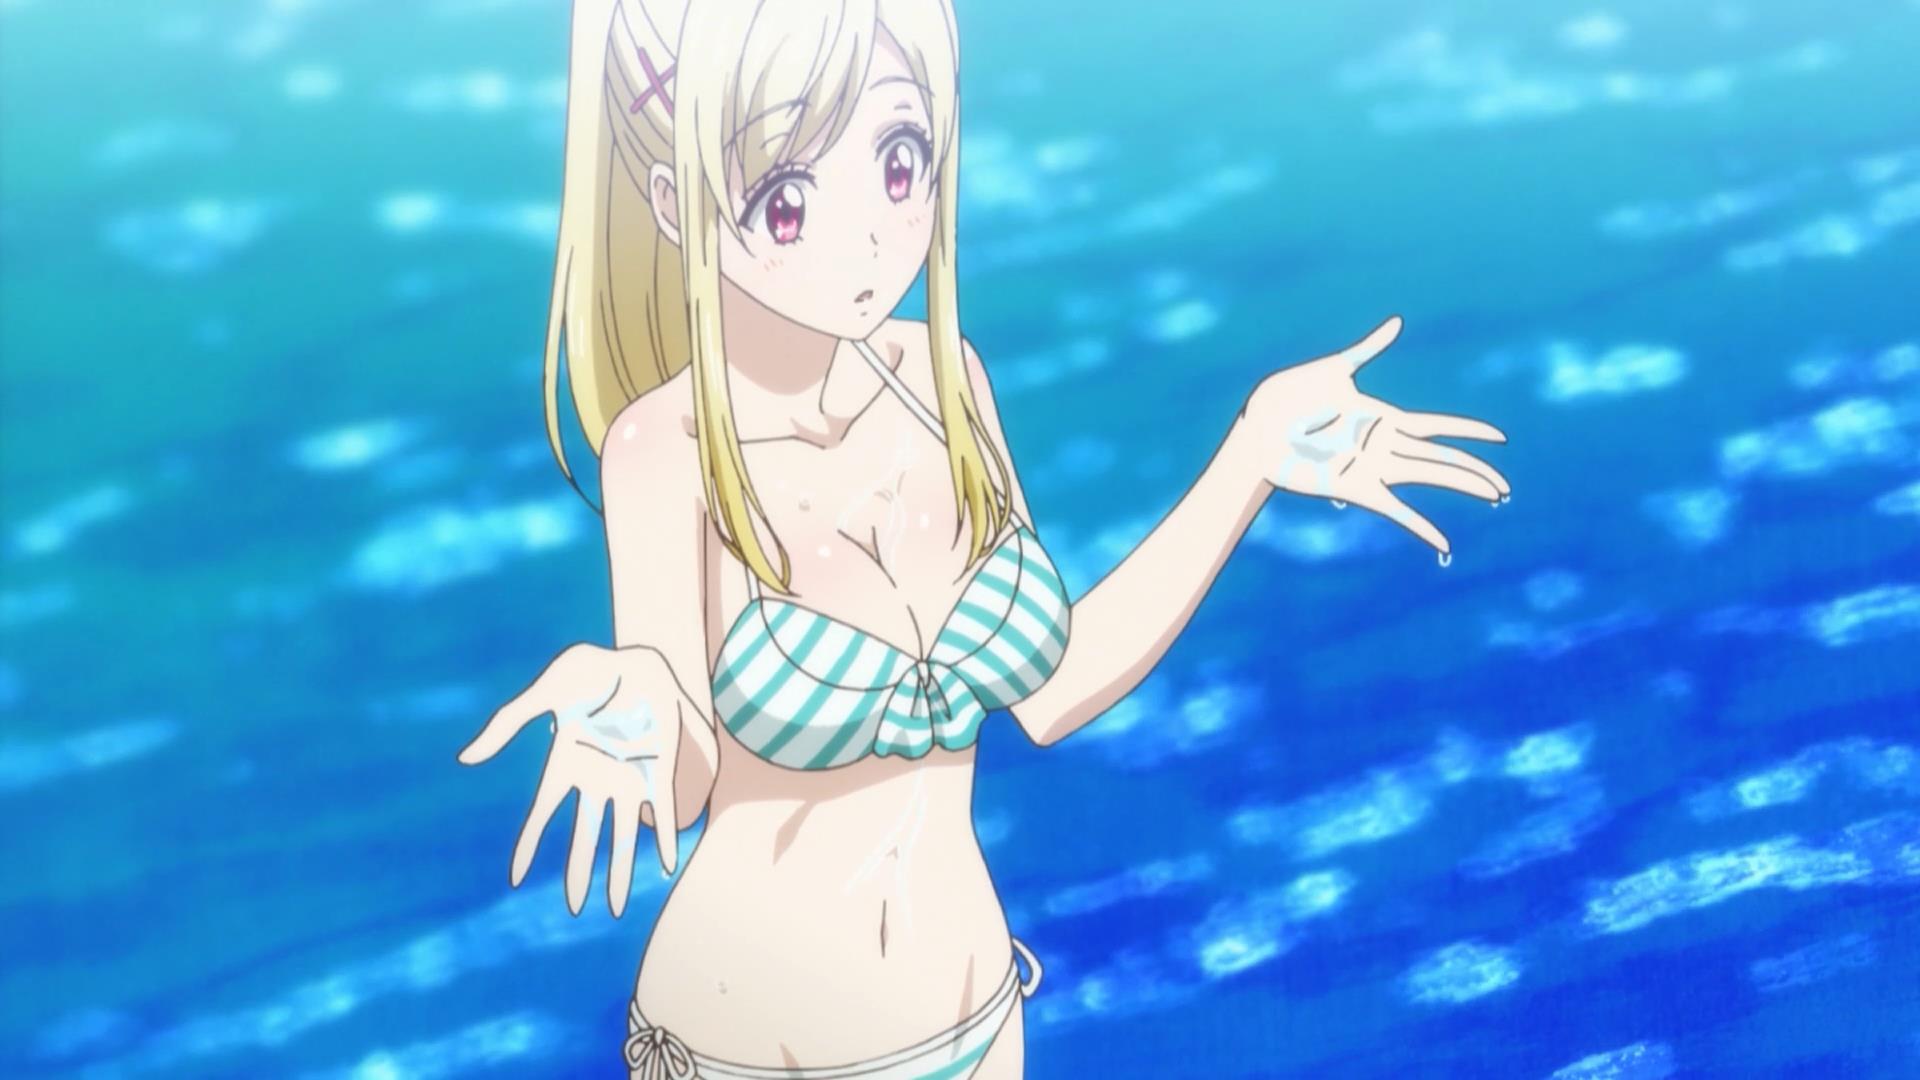 [HorribleSubs] Yamada-kun and the Seven Witches - 06 [1080p].mkv_snapshot_01.42_[2015.05.17_13.34.50]